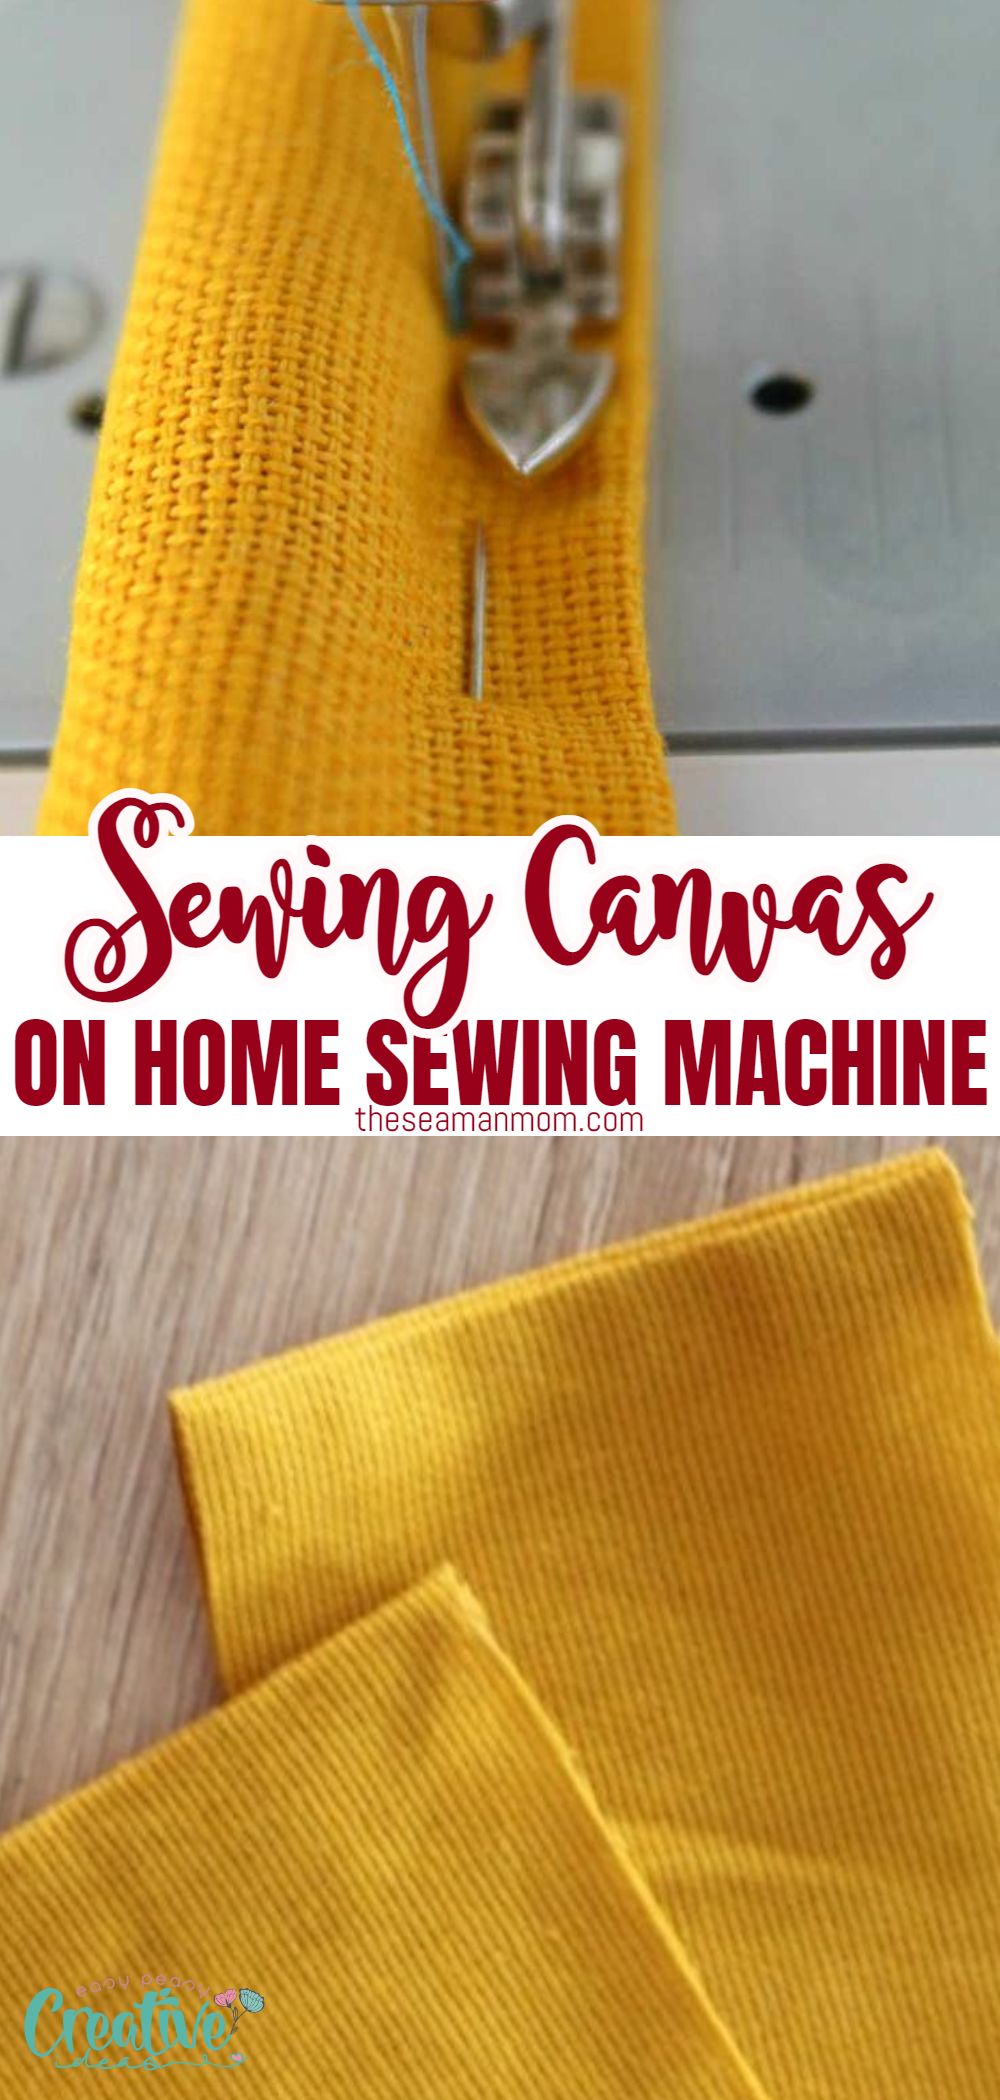 Follow these simple, easy tips for sewing canvas, and you'll soon be able to successfully make any fun projects that require canvas, for you and your home! via @petroneagu